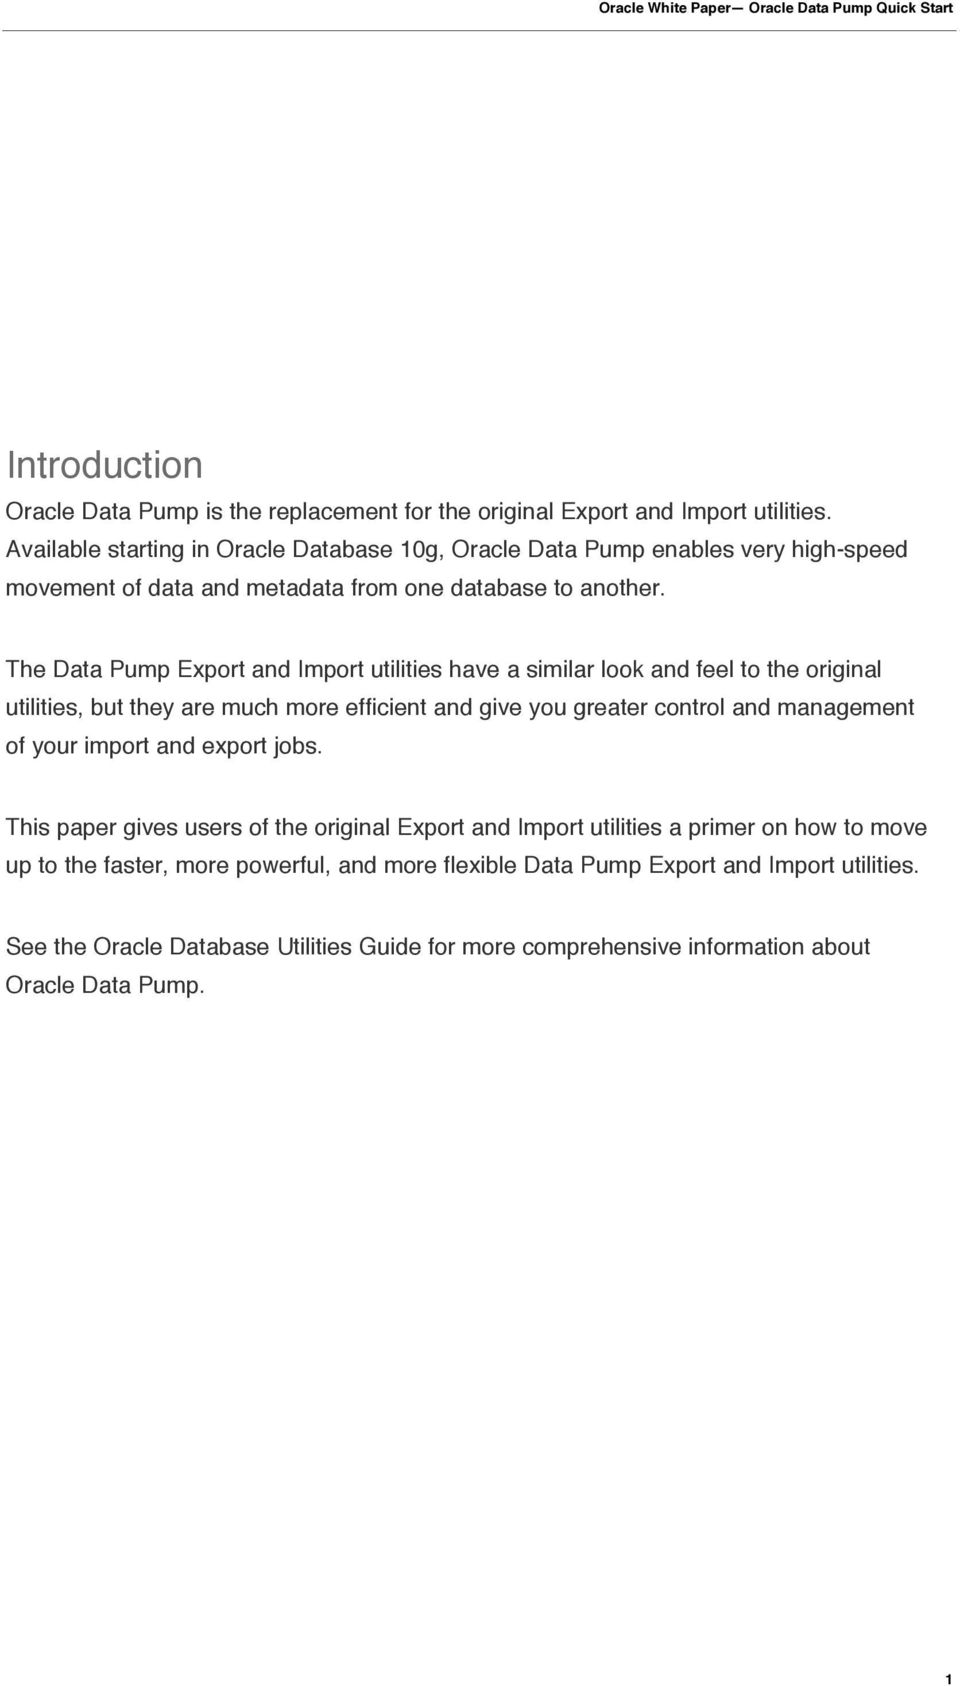 The Data Pump Export and Import utilities have a similar look and feel to the original utilities, but they are much more efficient and give you greater control and management of